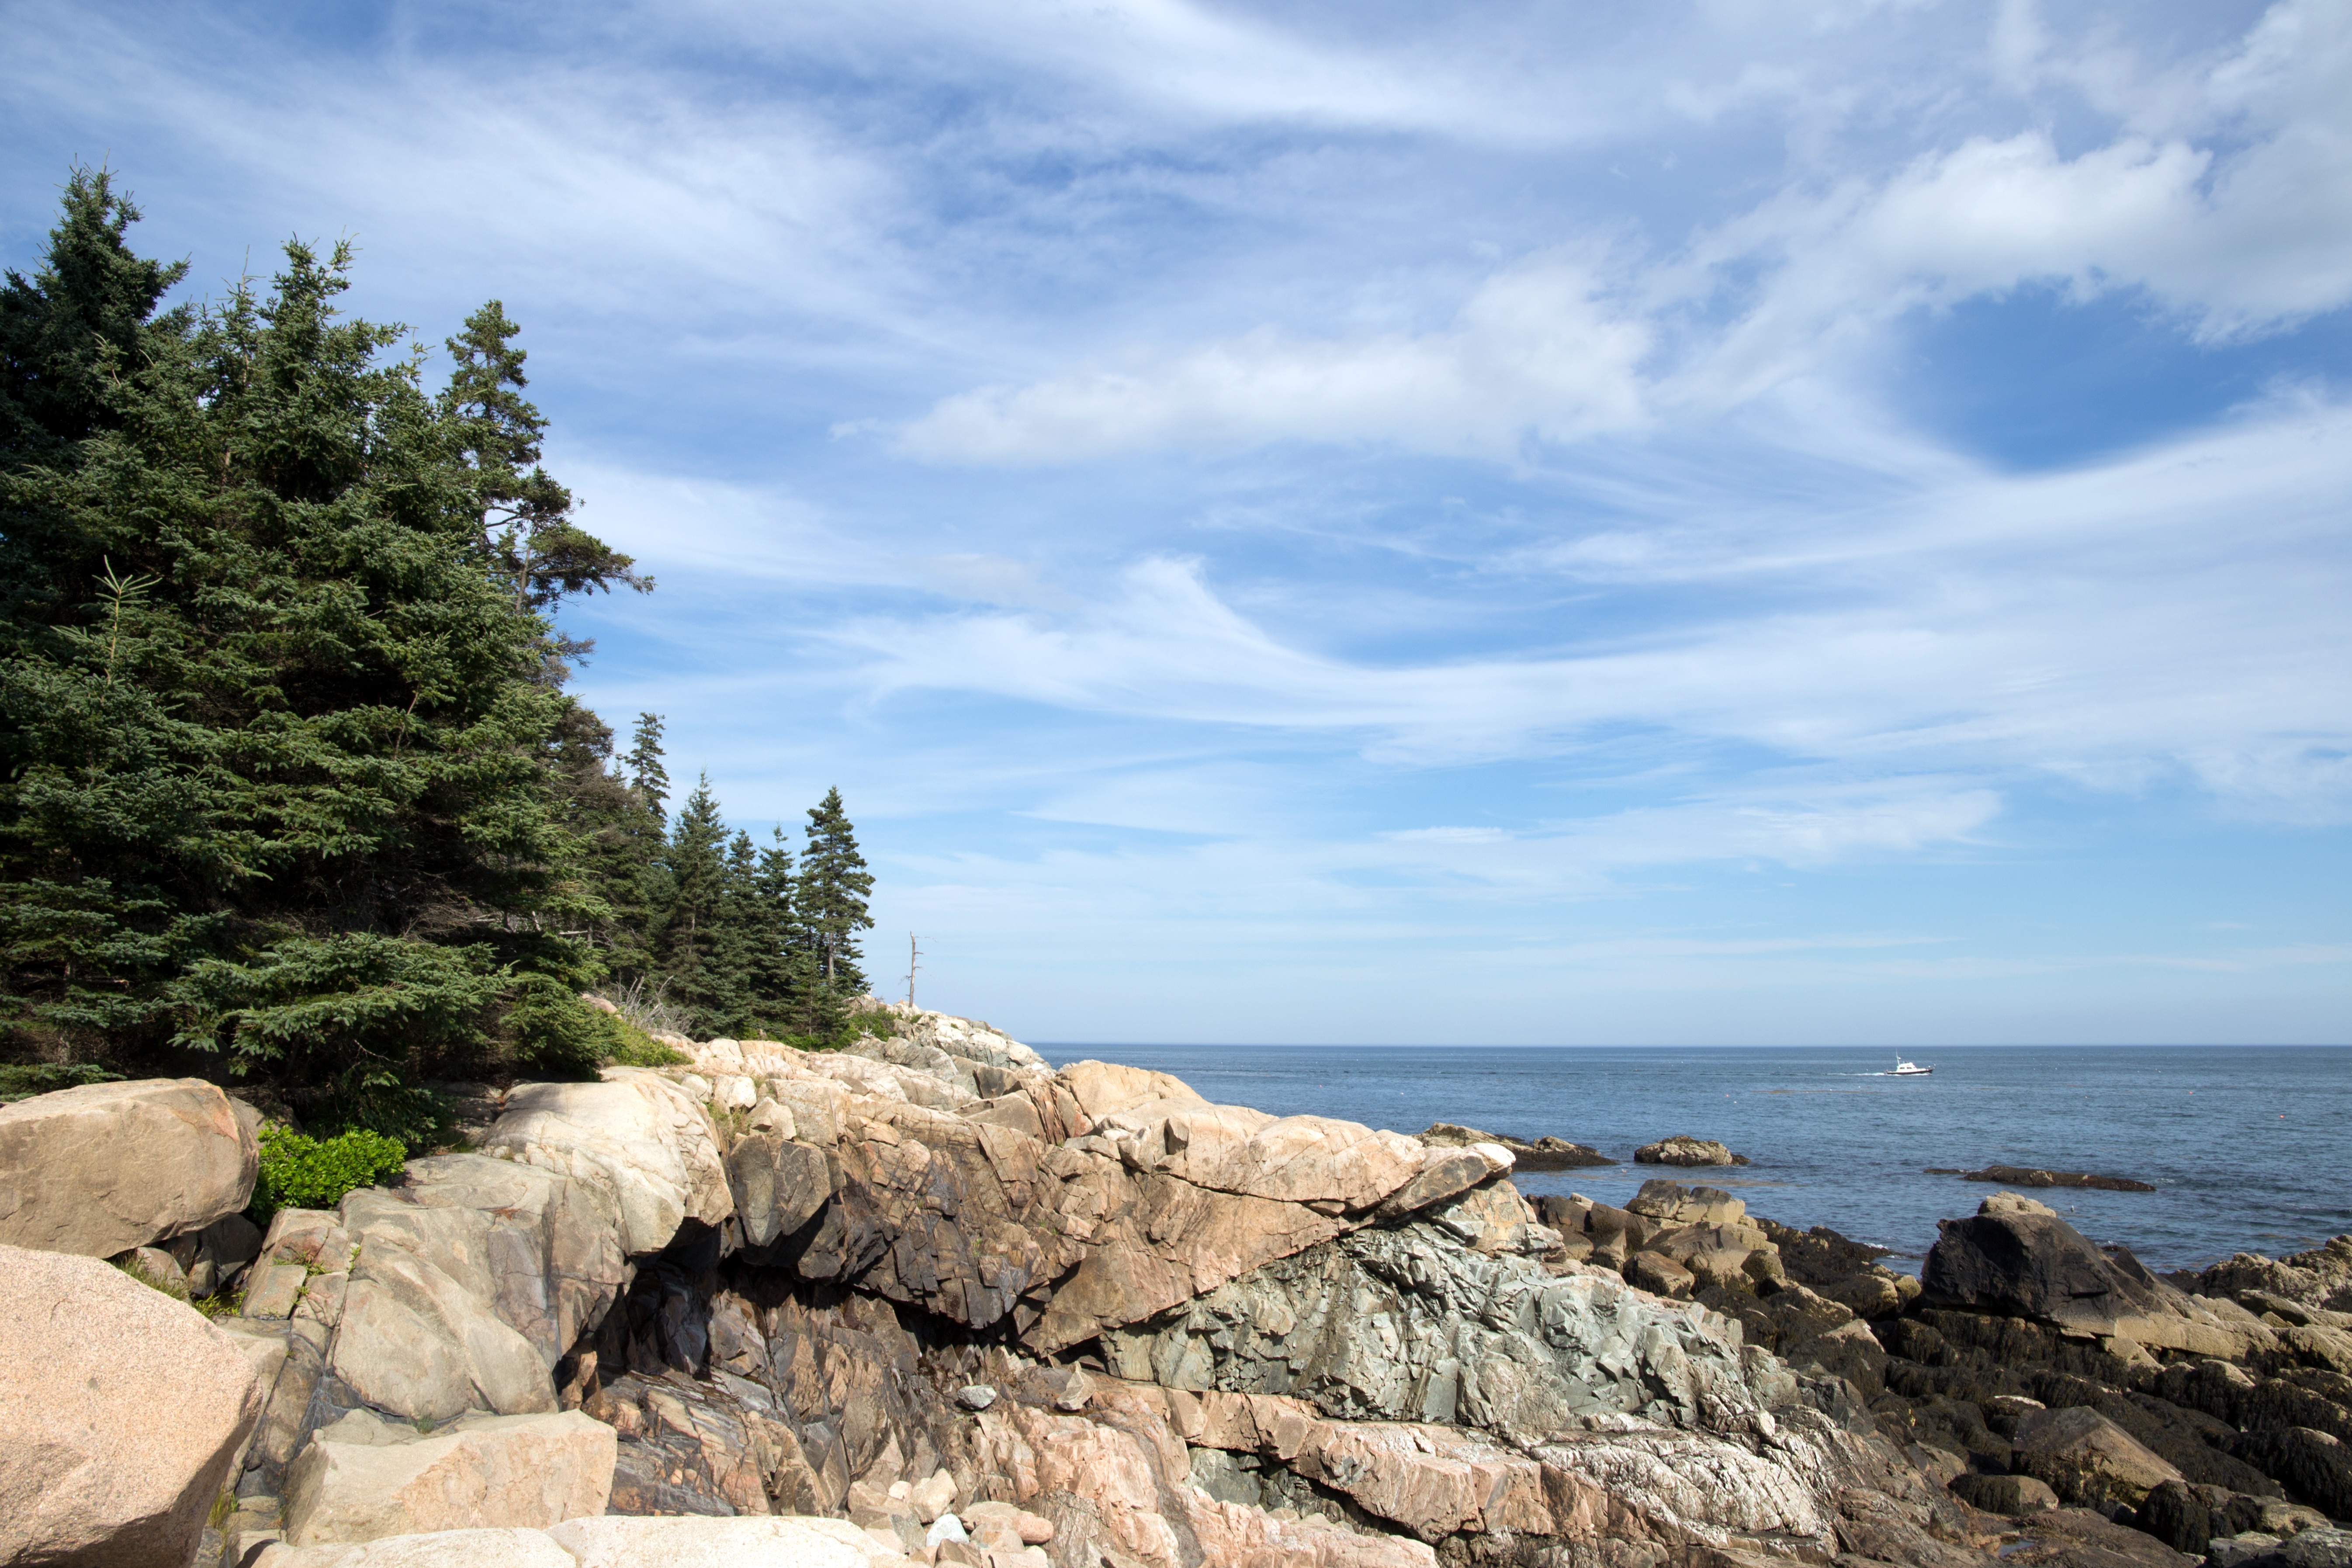 gray rock formation with pine trees beside calm sea at daytime